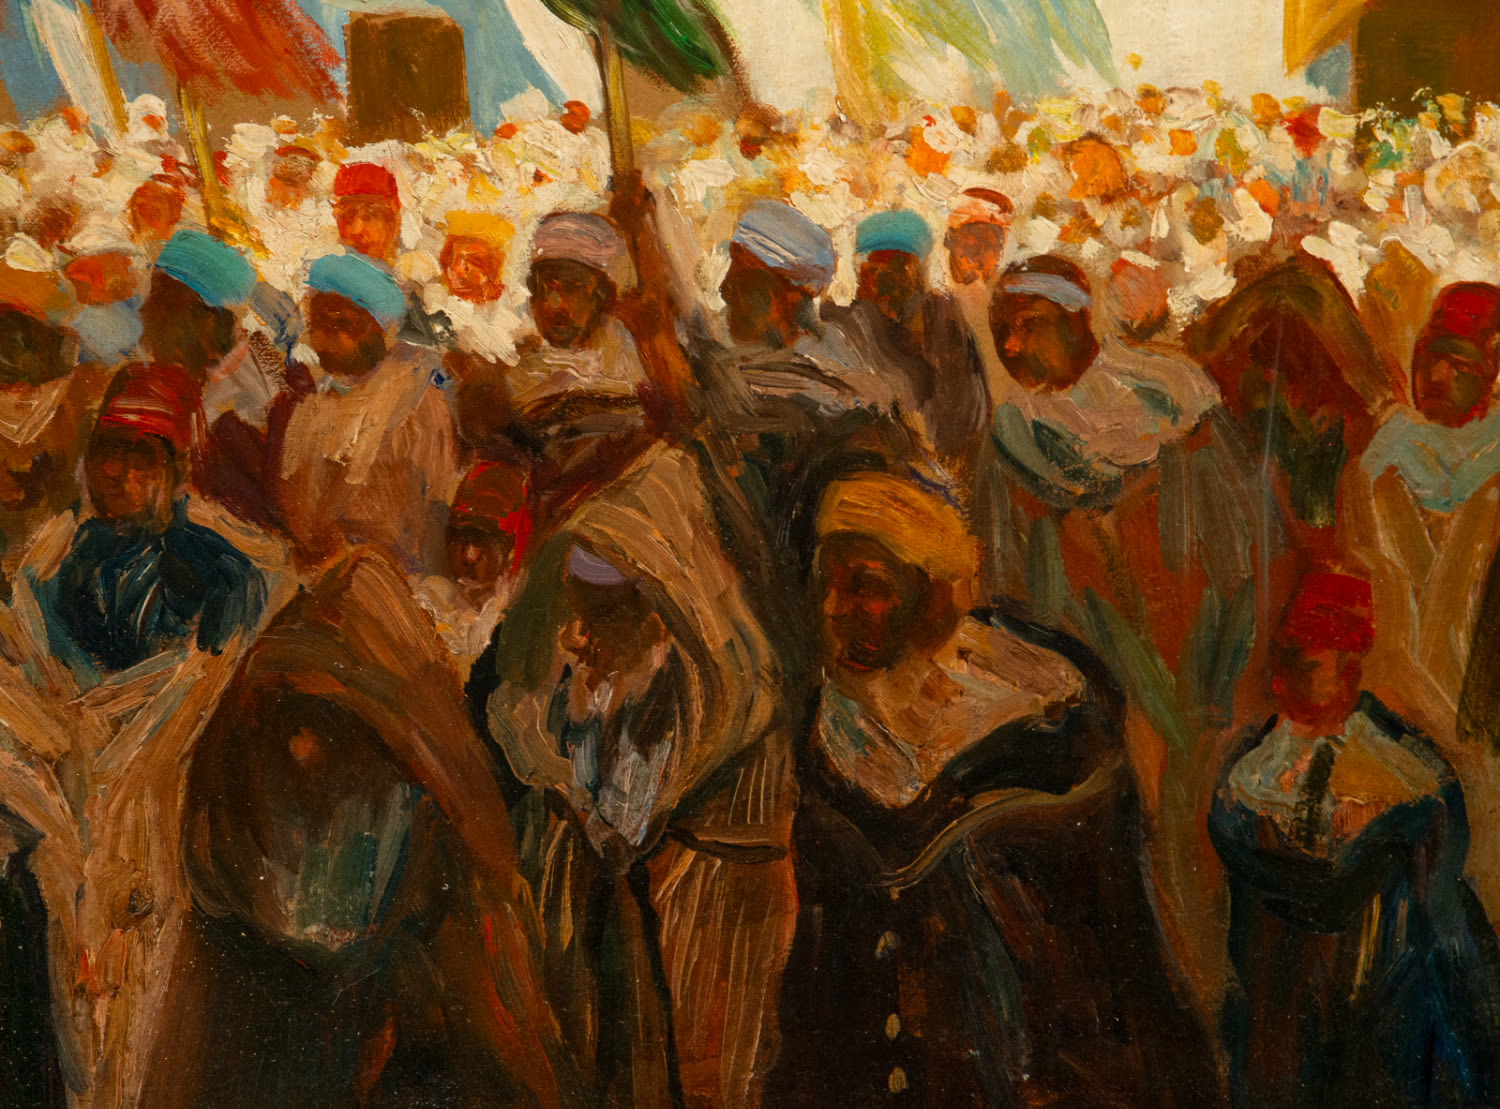 View of Characters in Orientalist Souk, signed, Spanish school of the 19th century - early 20th cent - Image 3 of 6